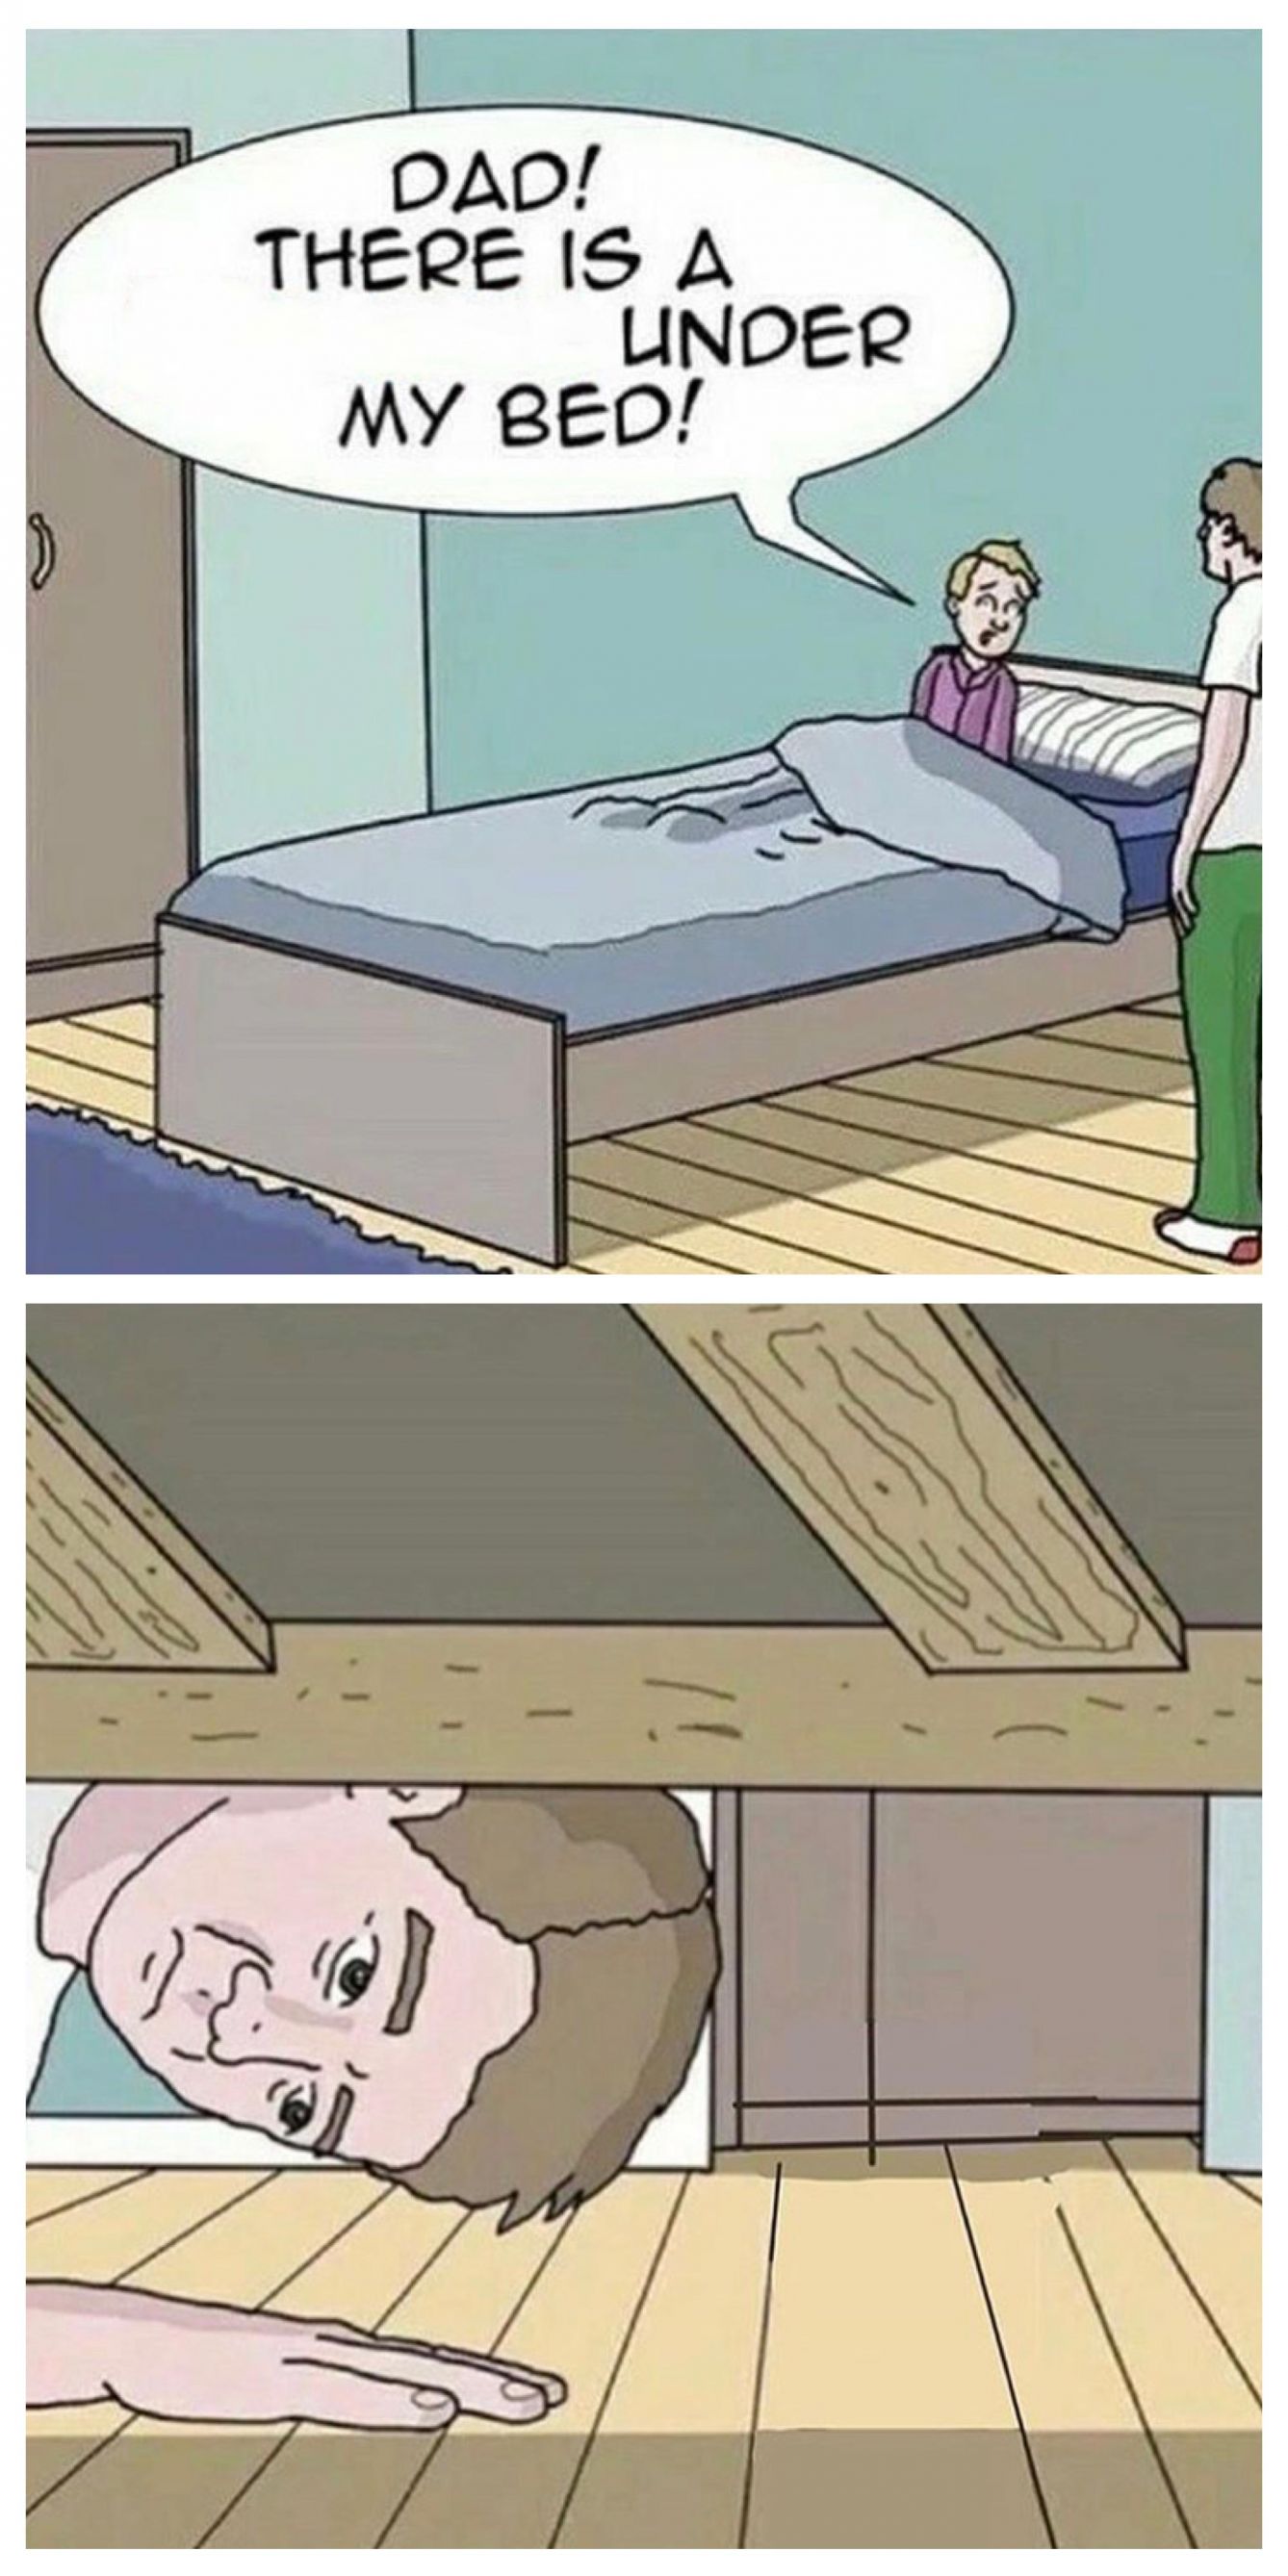 High Quality Dad! There is a monster under my bed Blank Meme Template